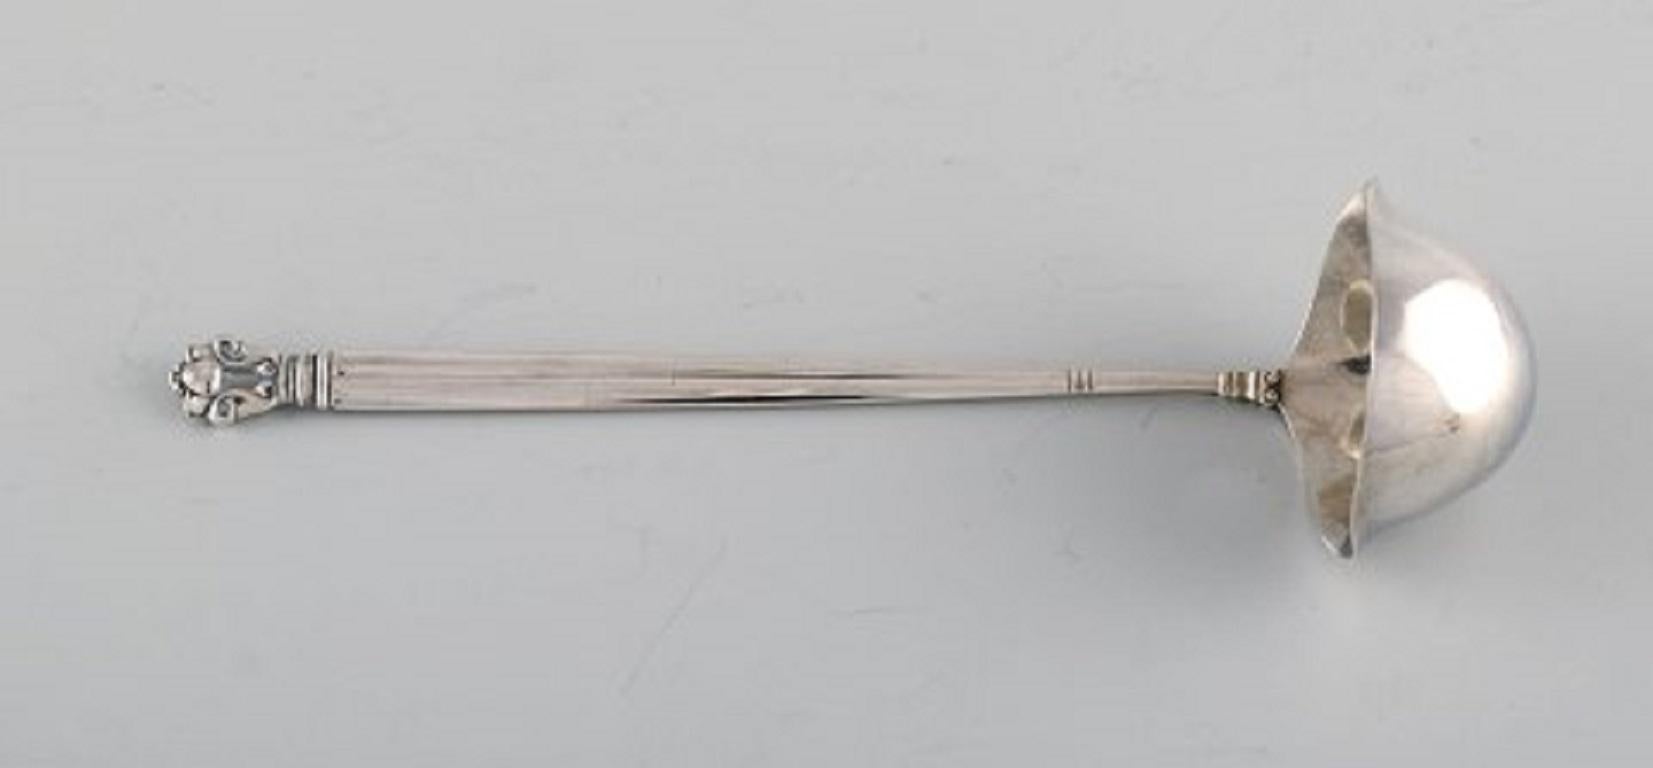 Georg Jensen Acorn sauce spoon in sterling silver.
Measure: Length 17.5 cm.
In very good condition.
Stamped.